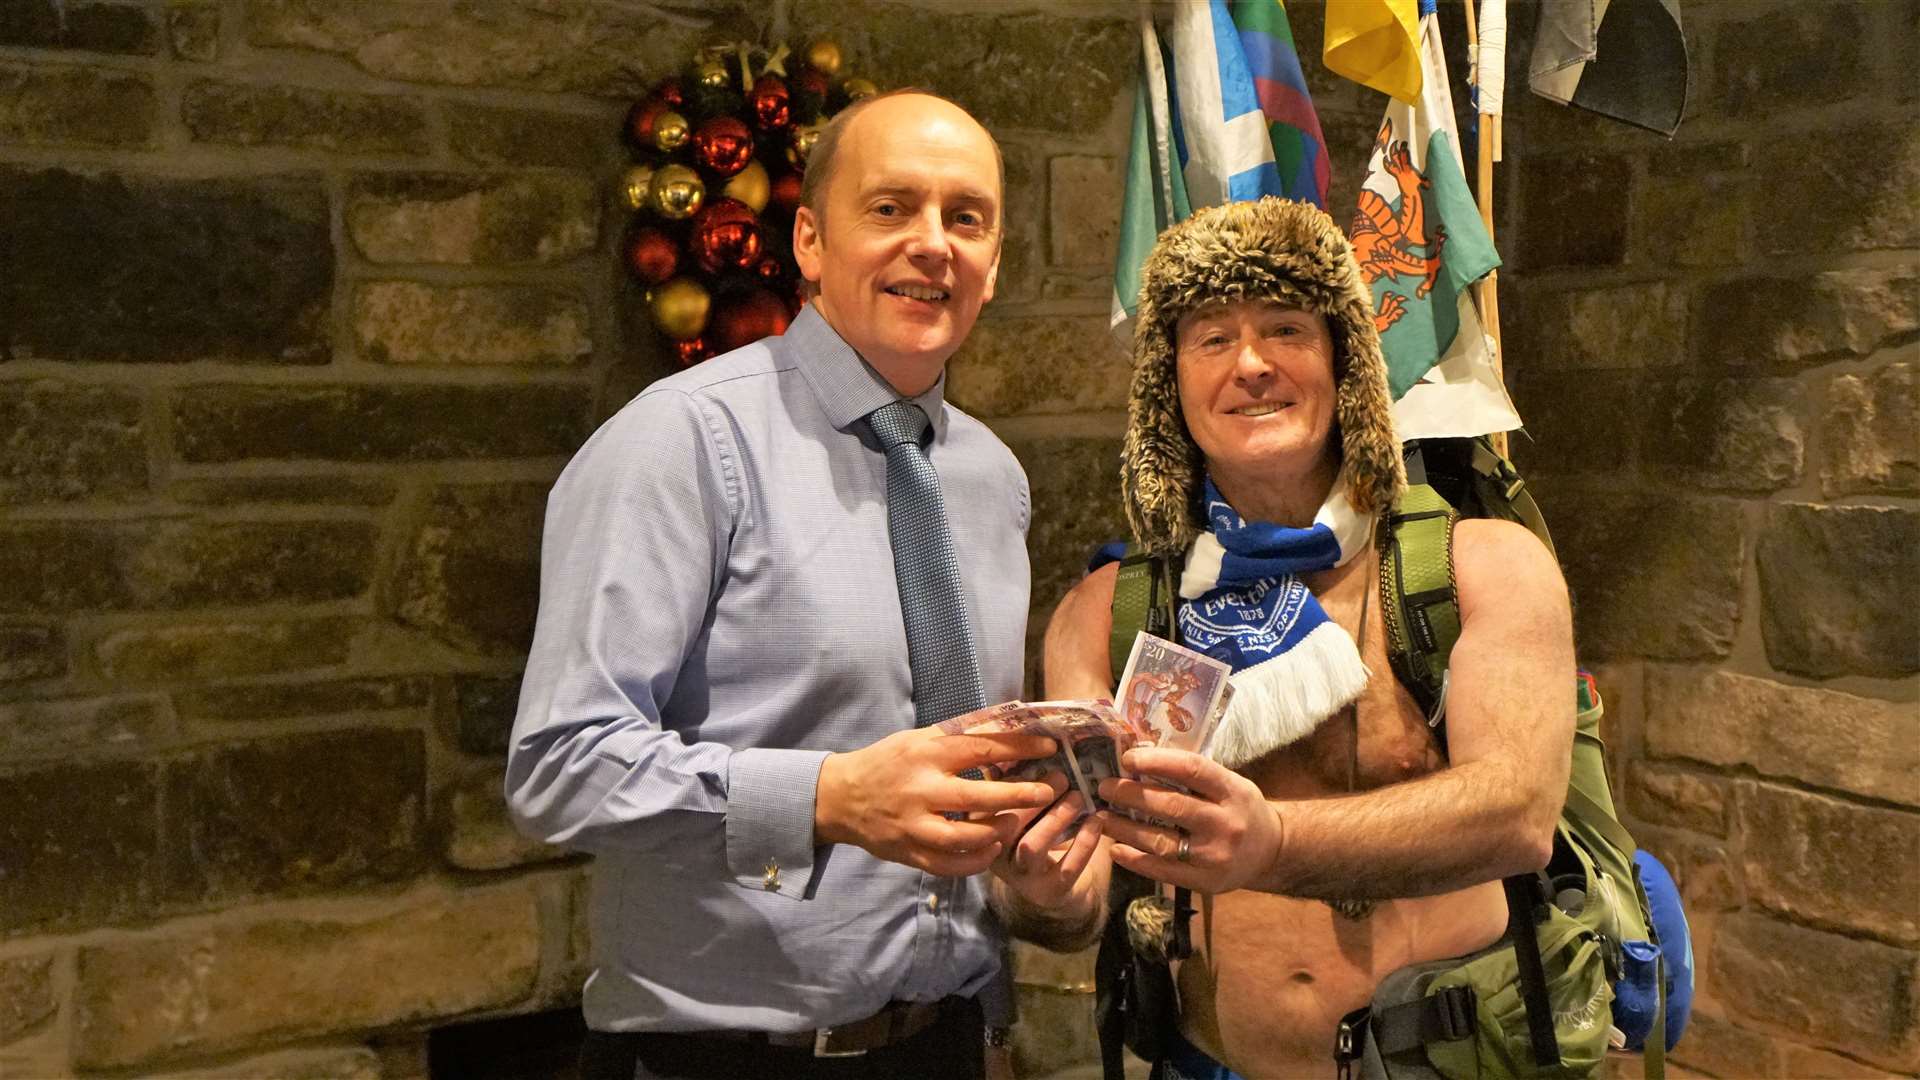 Andrew Mackay, owner of the Norseman Hotel, was delighted that Speedo Mick was staying and gave him a donation of £100. Picture: DGS